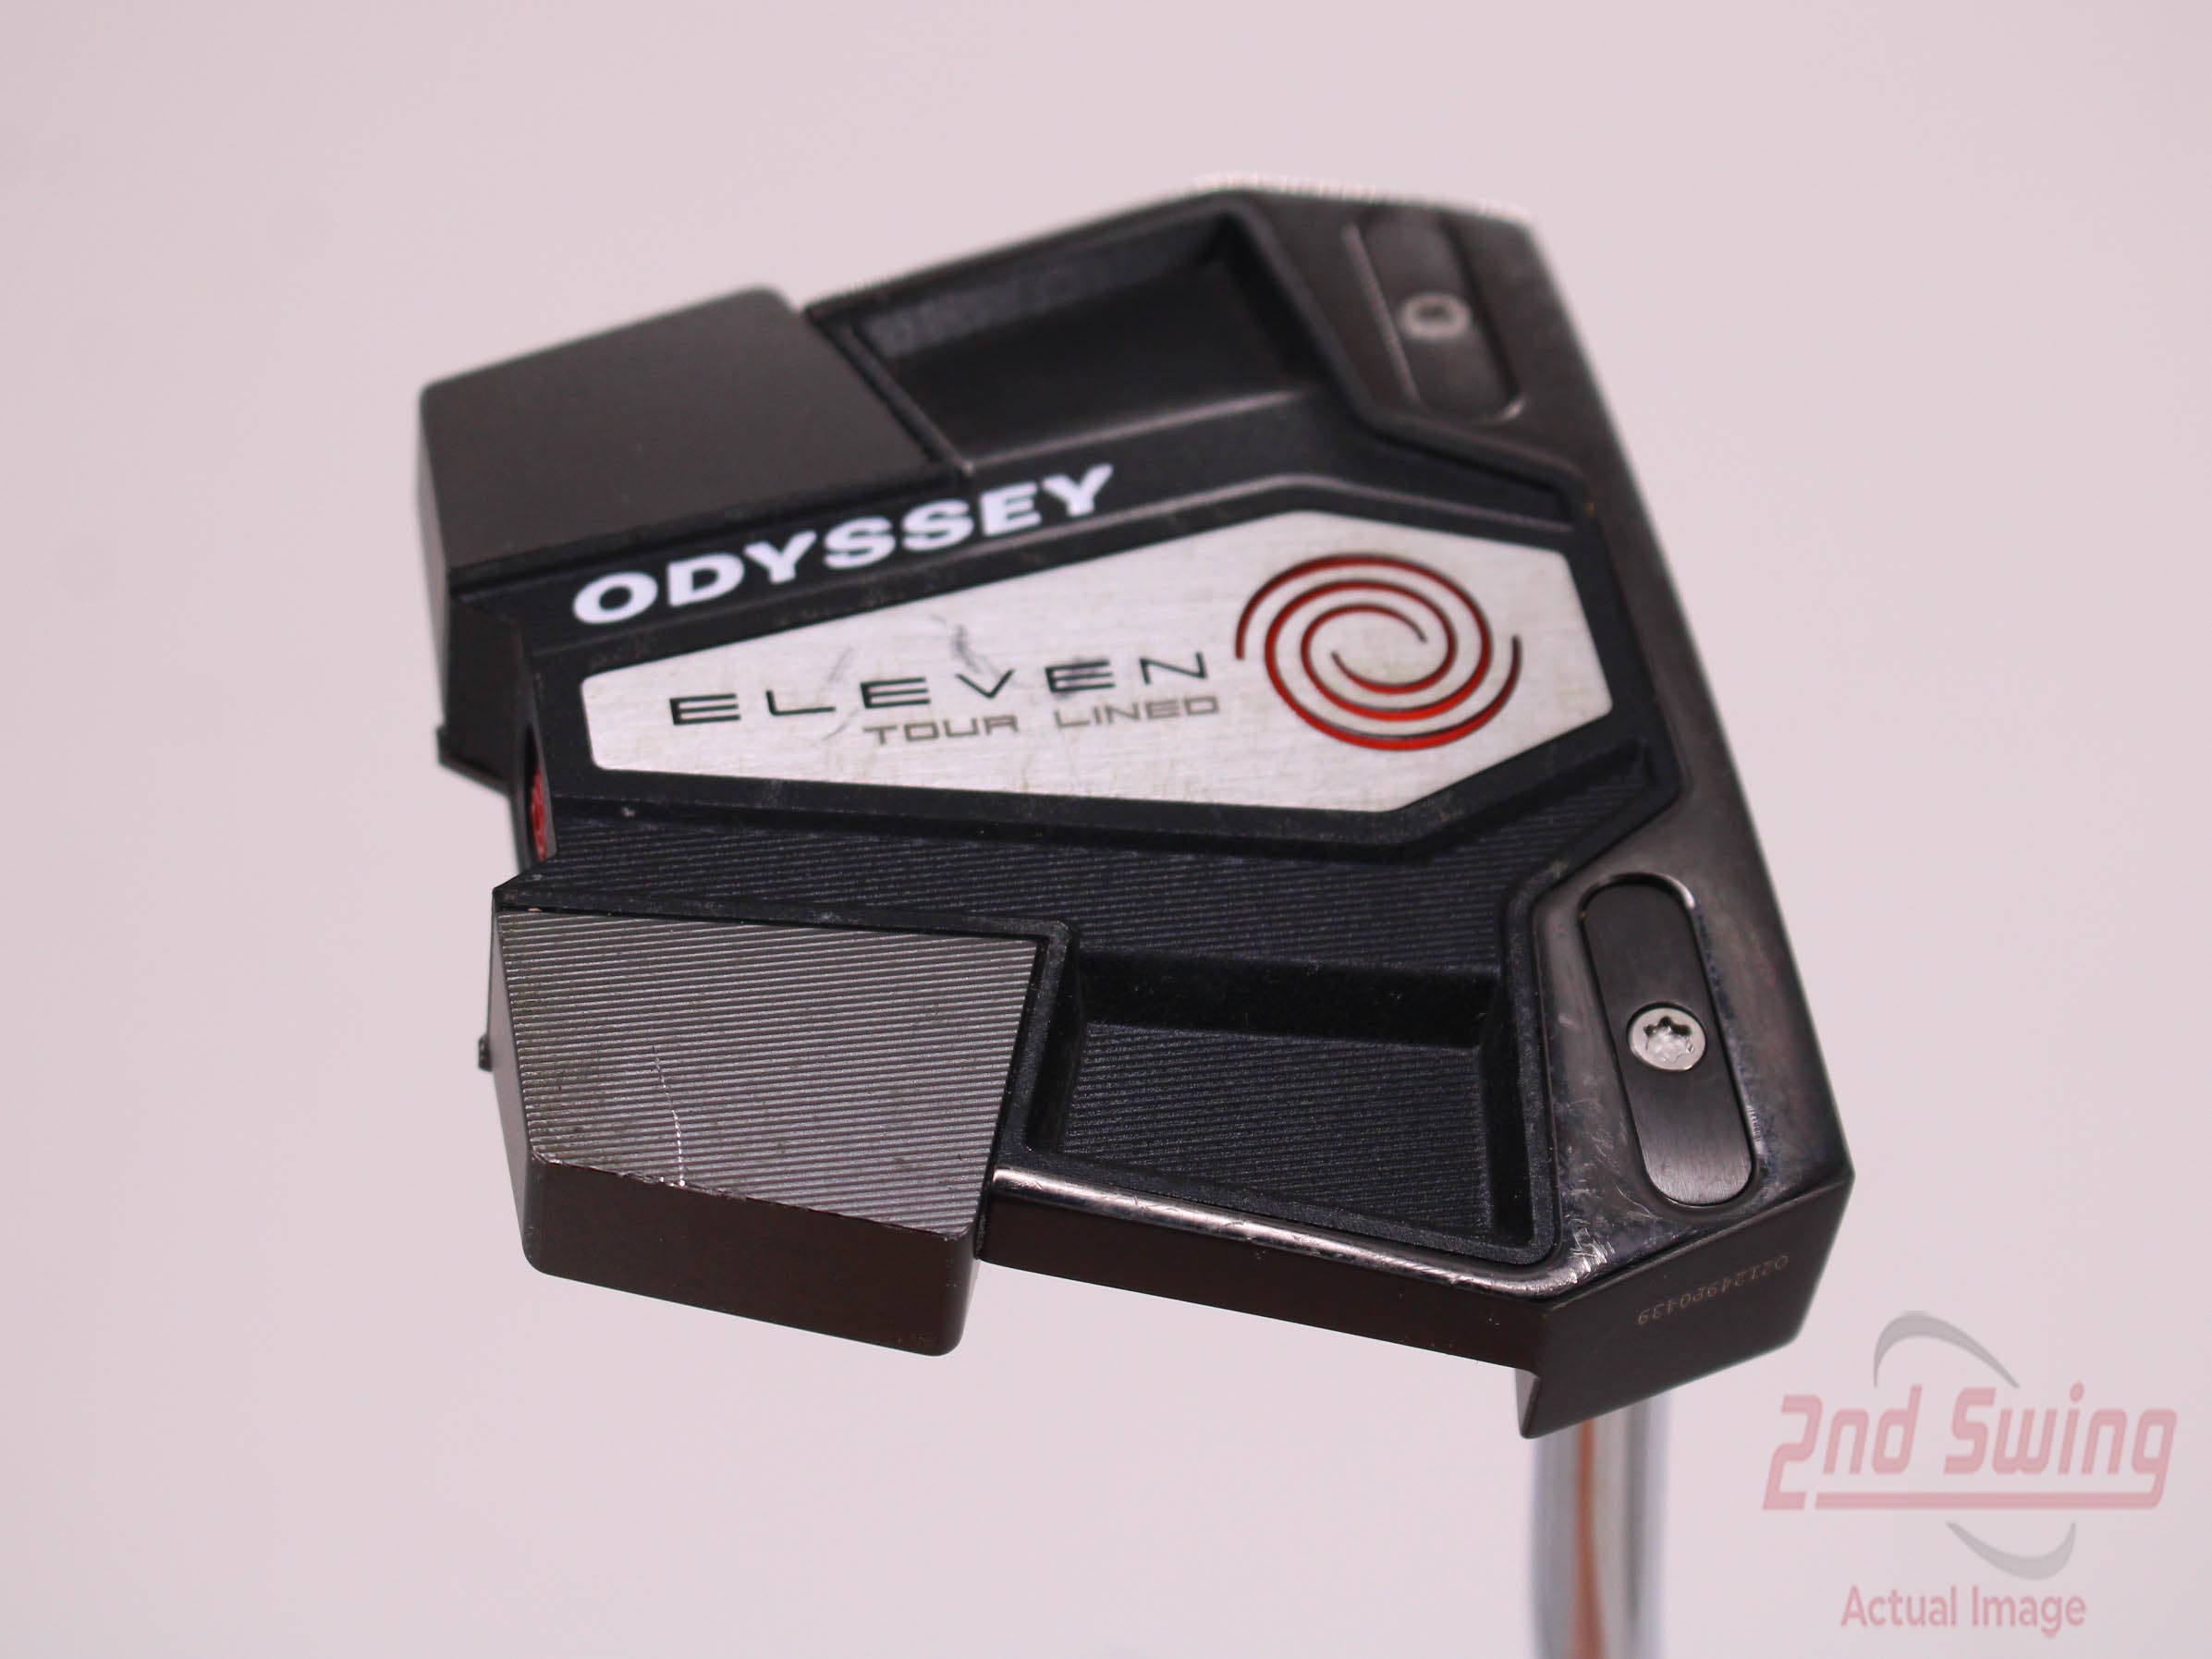 Odyssey 2-Ball Eleven Tour Lined Putter | 2nd Swing Golf